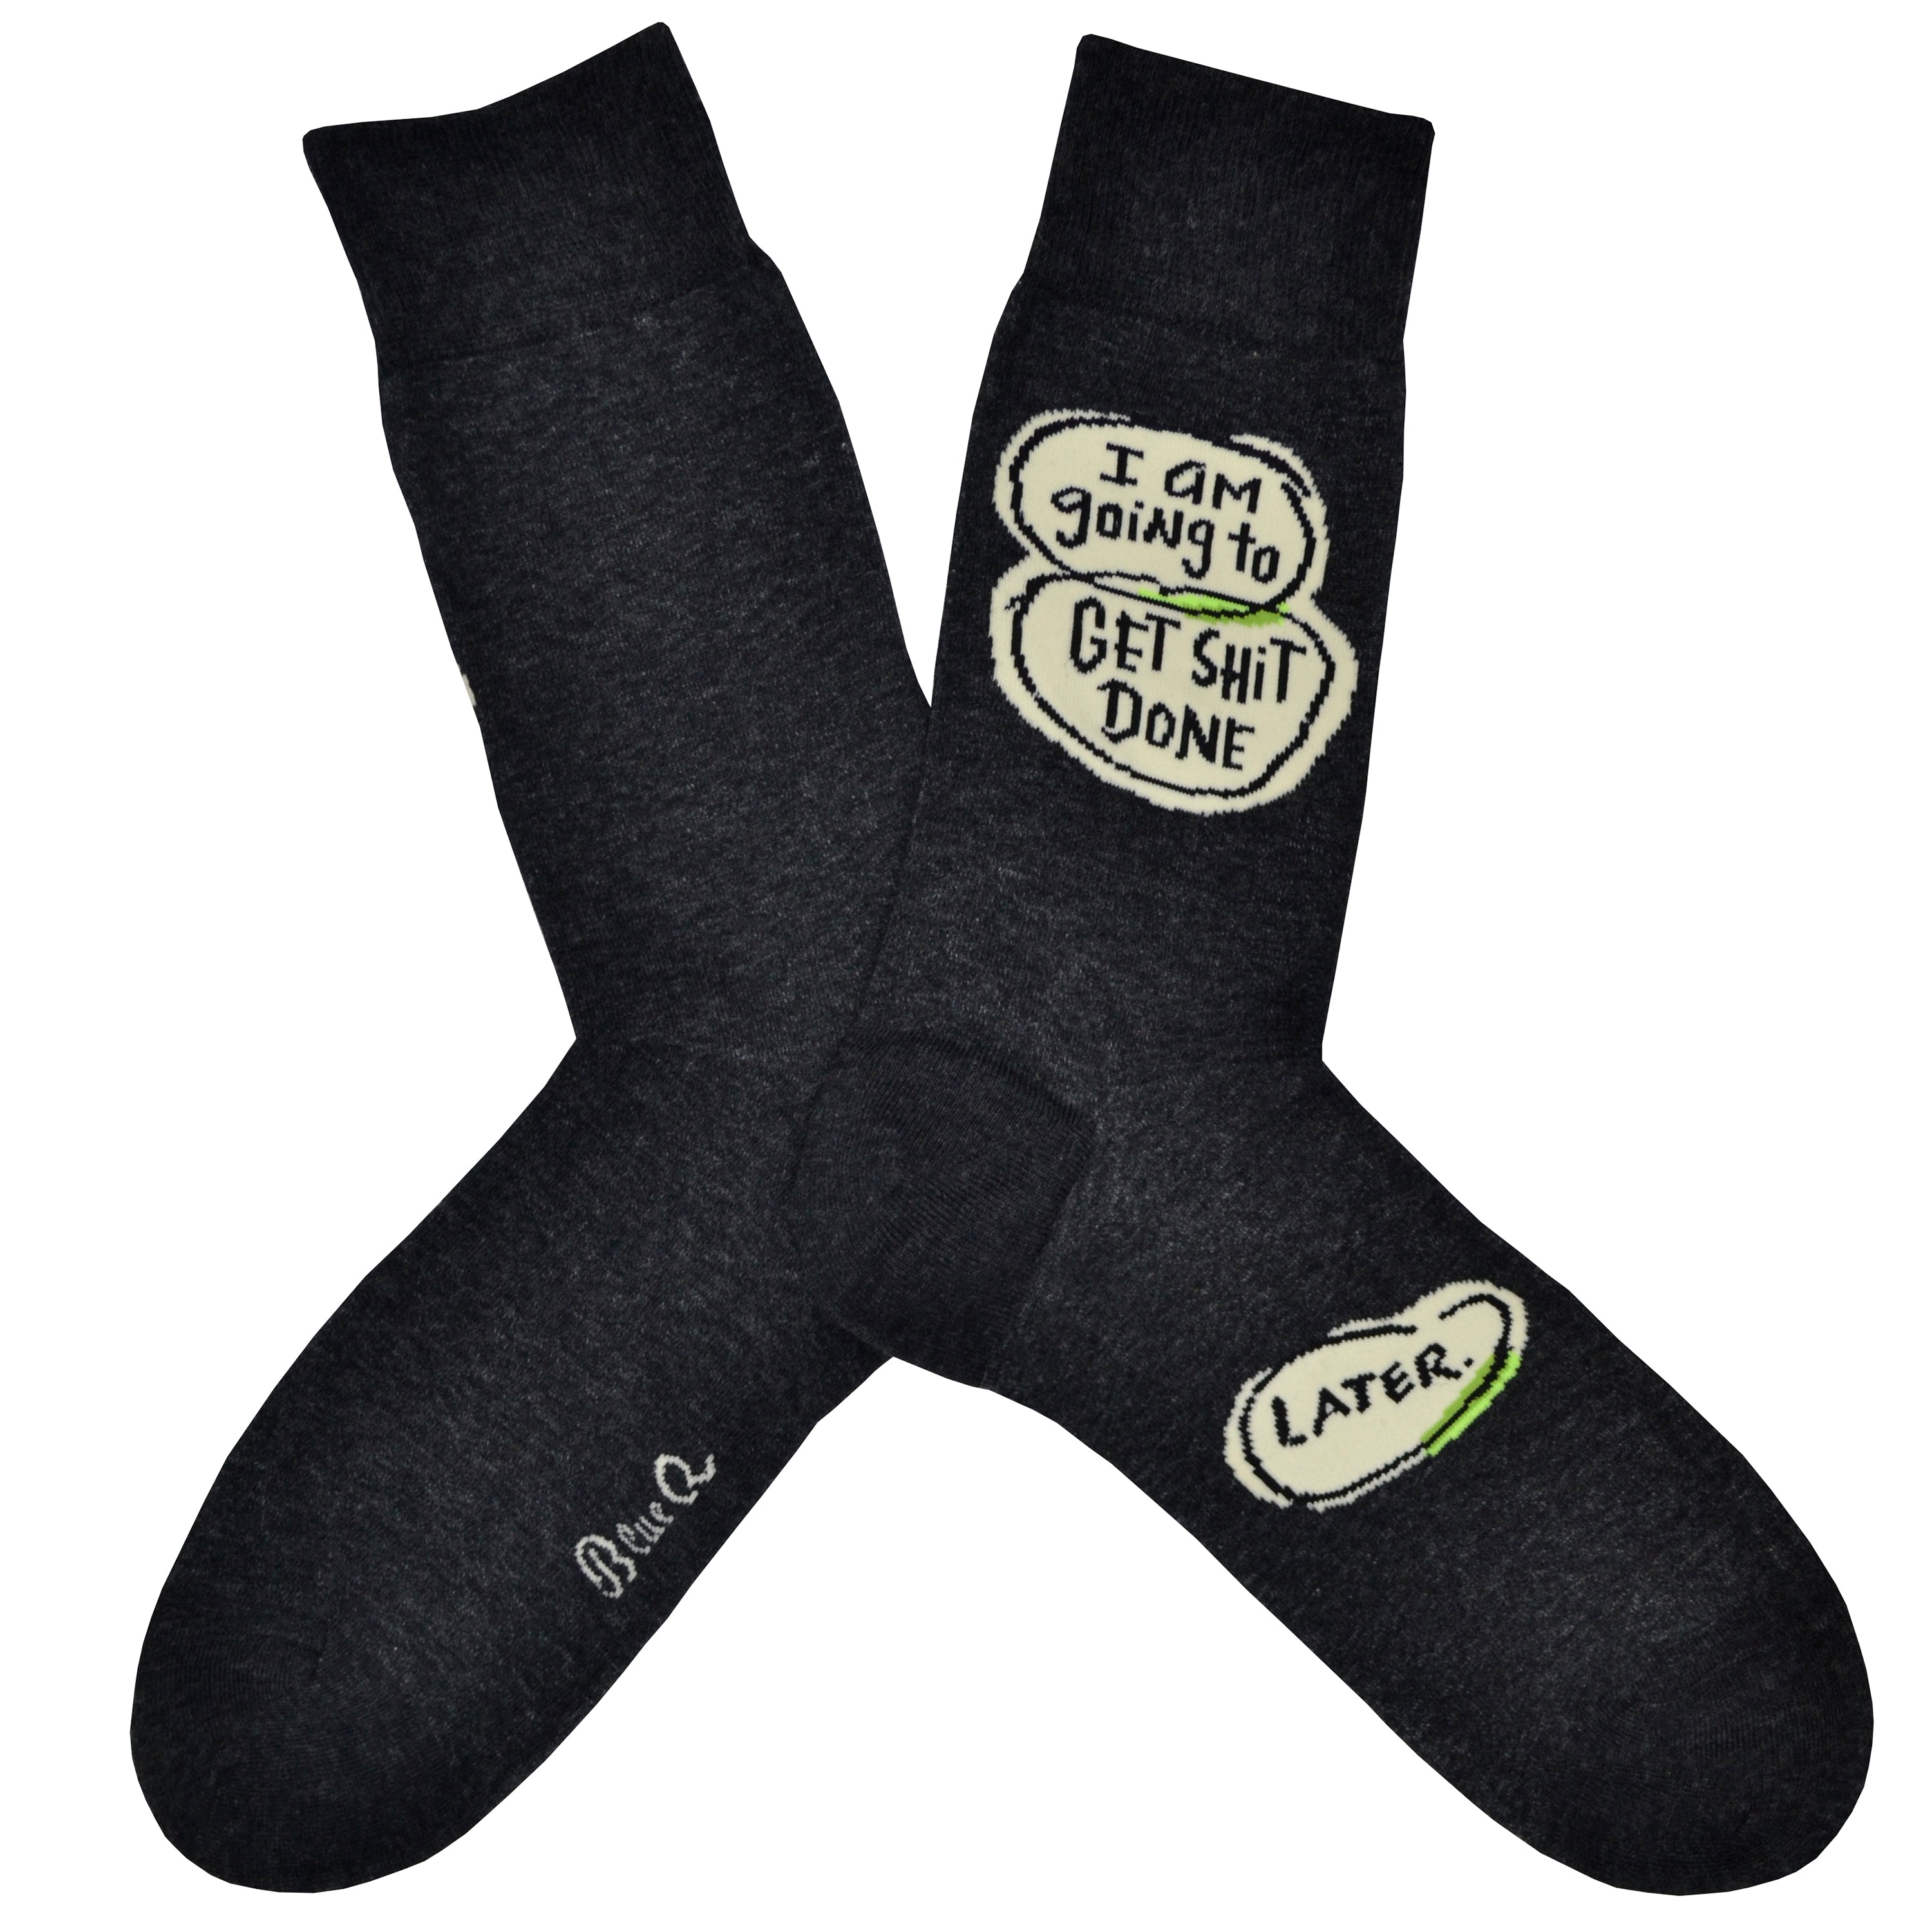 These dark gray cotton funny men's crew socks by the brand Blue Q have word bubbles with the words 